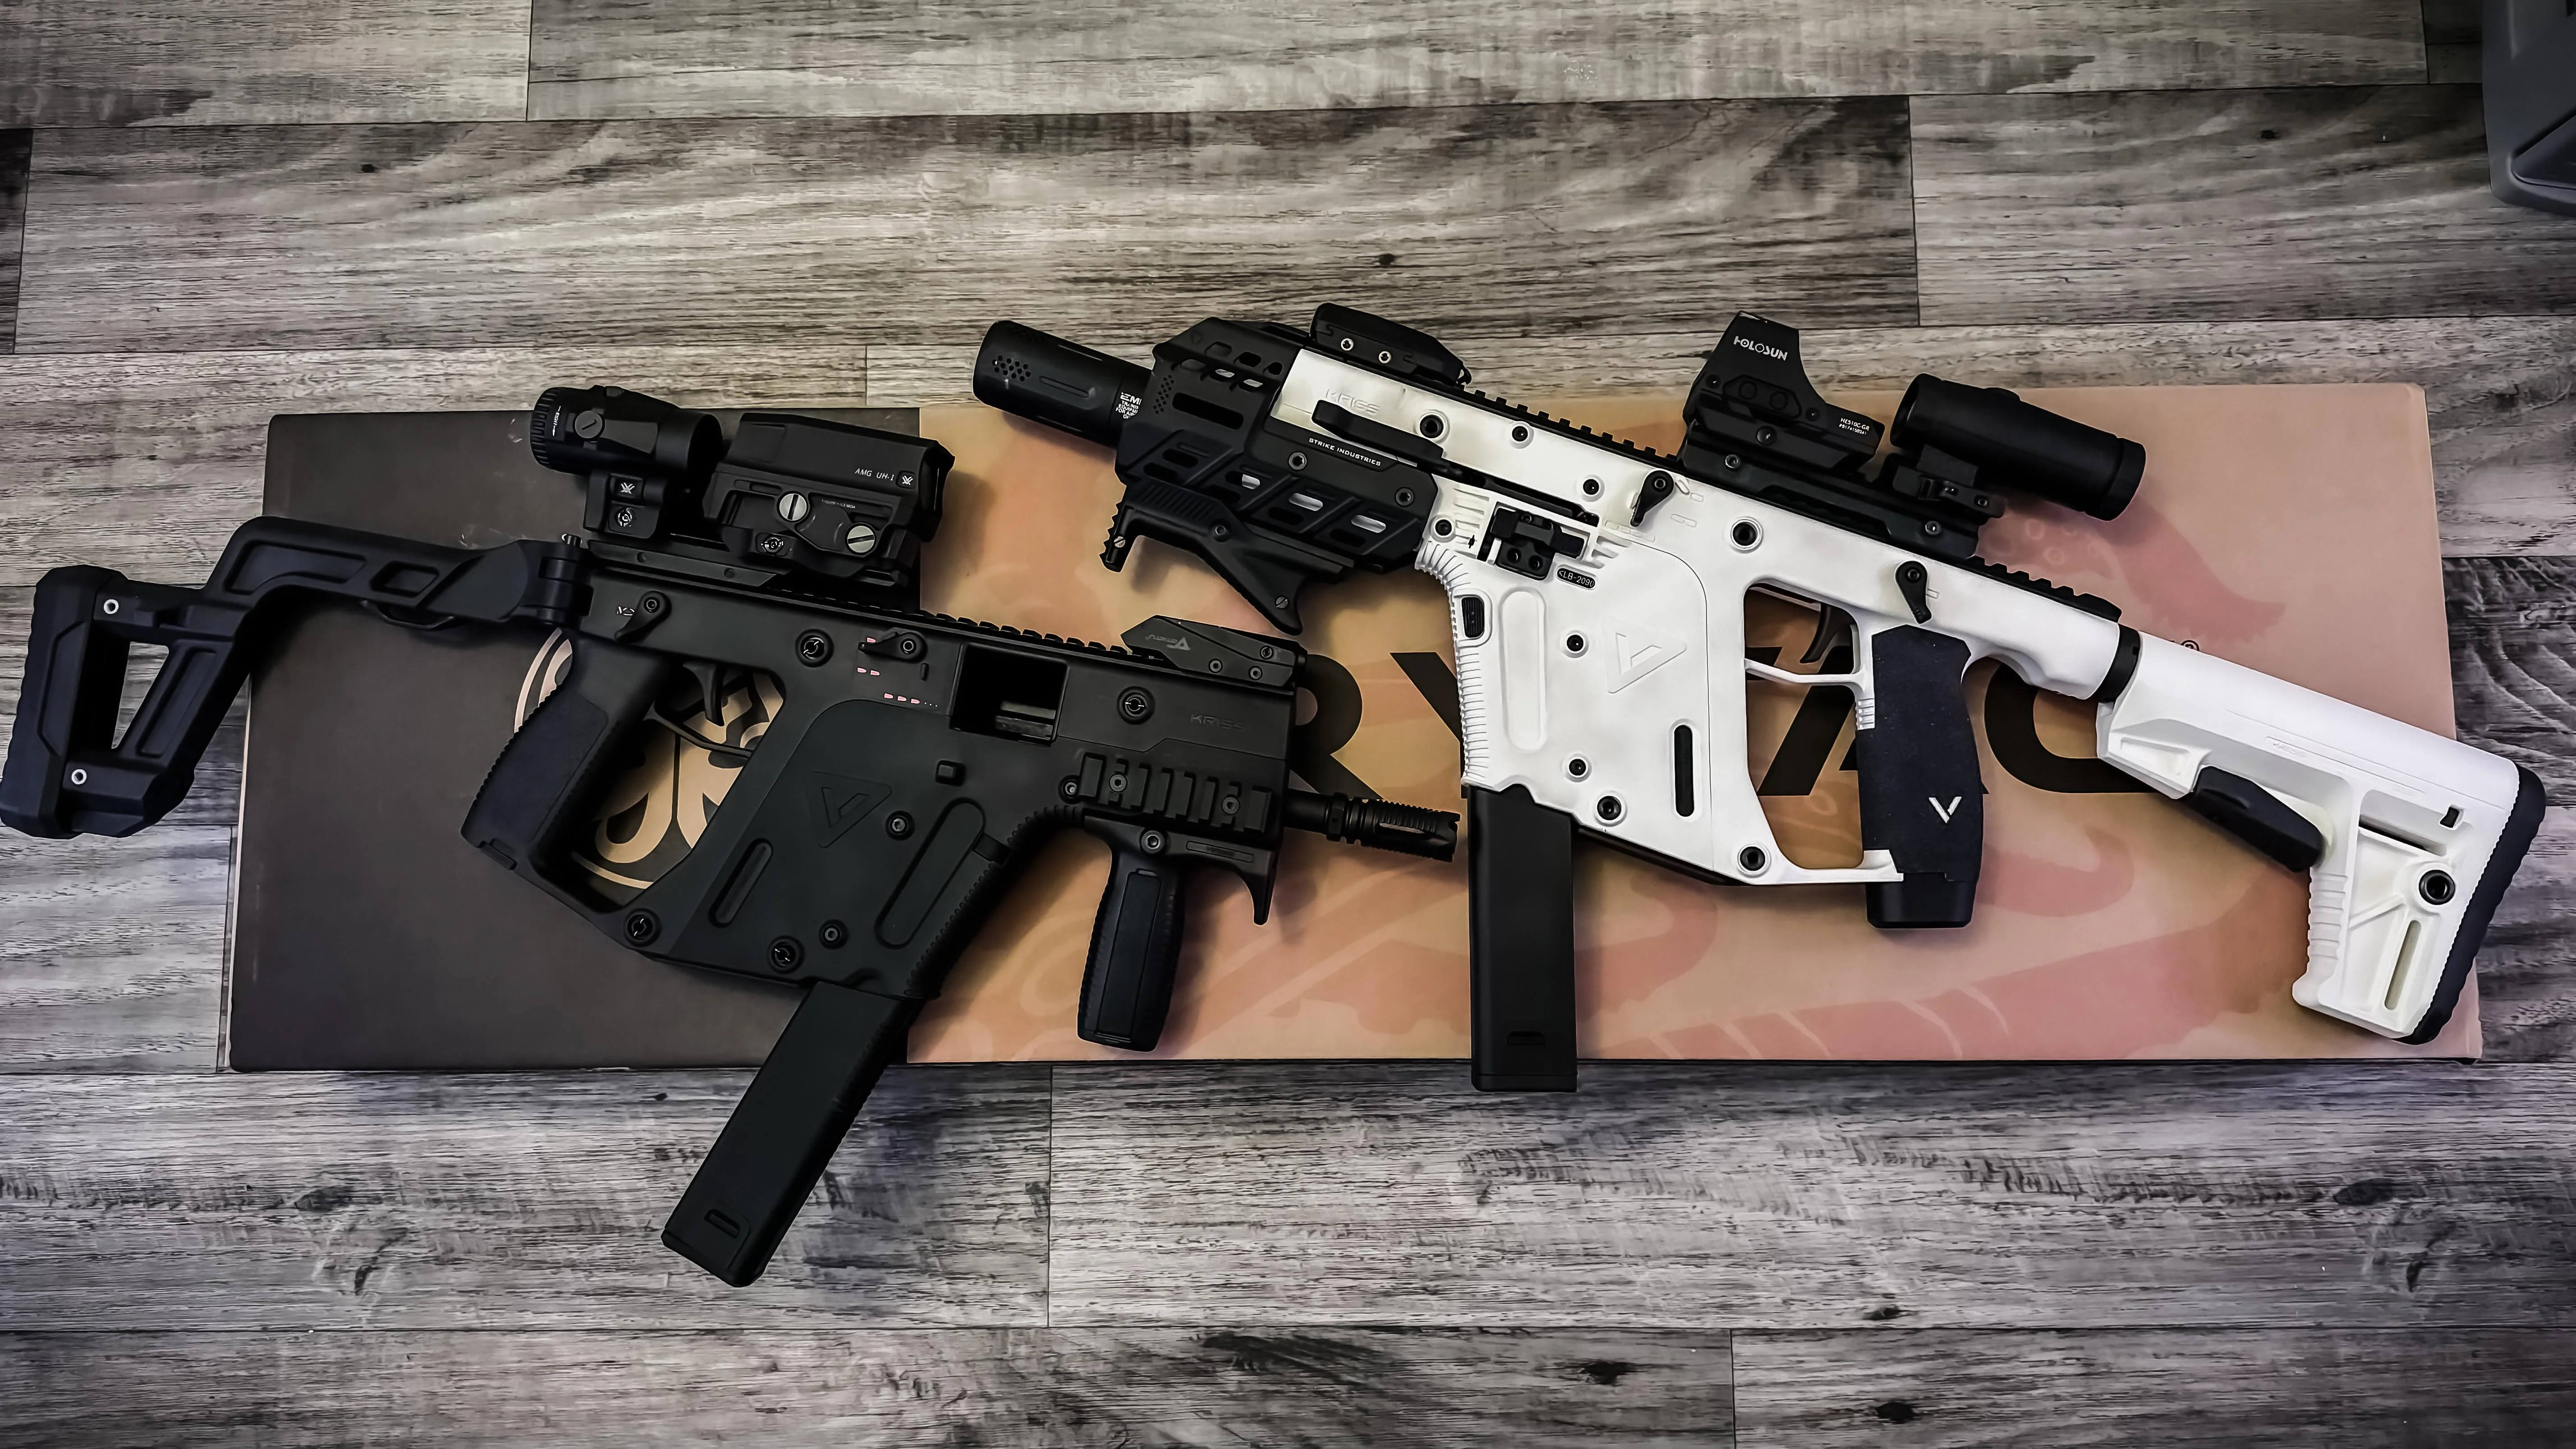 The Gbb version (left) or the AEG version (right), kriss vector krytac